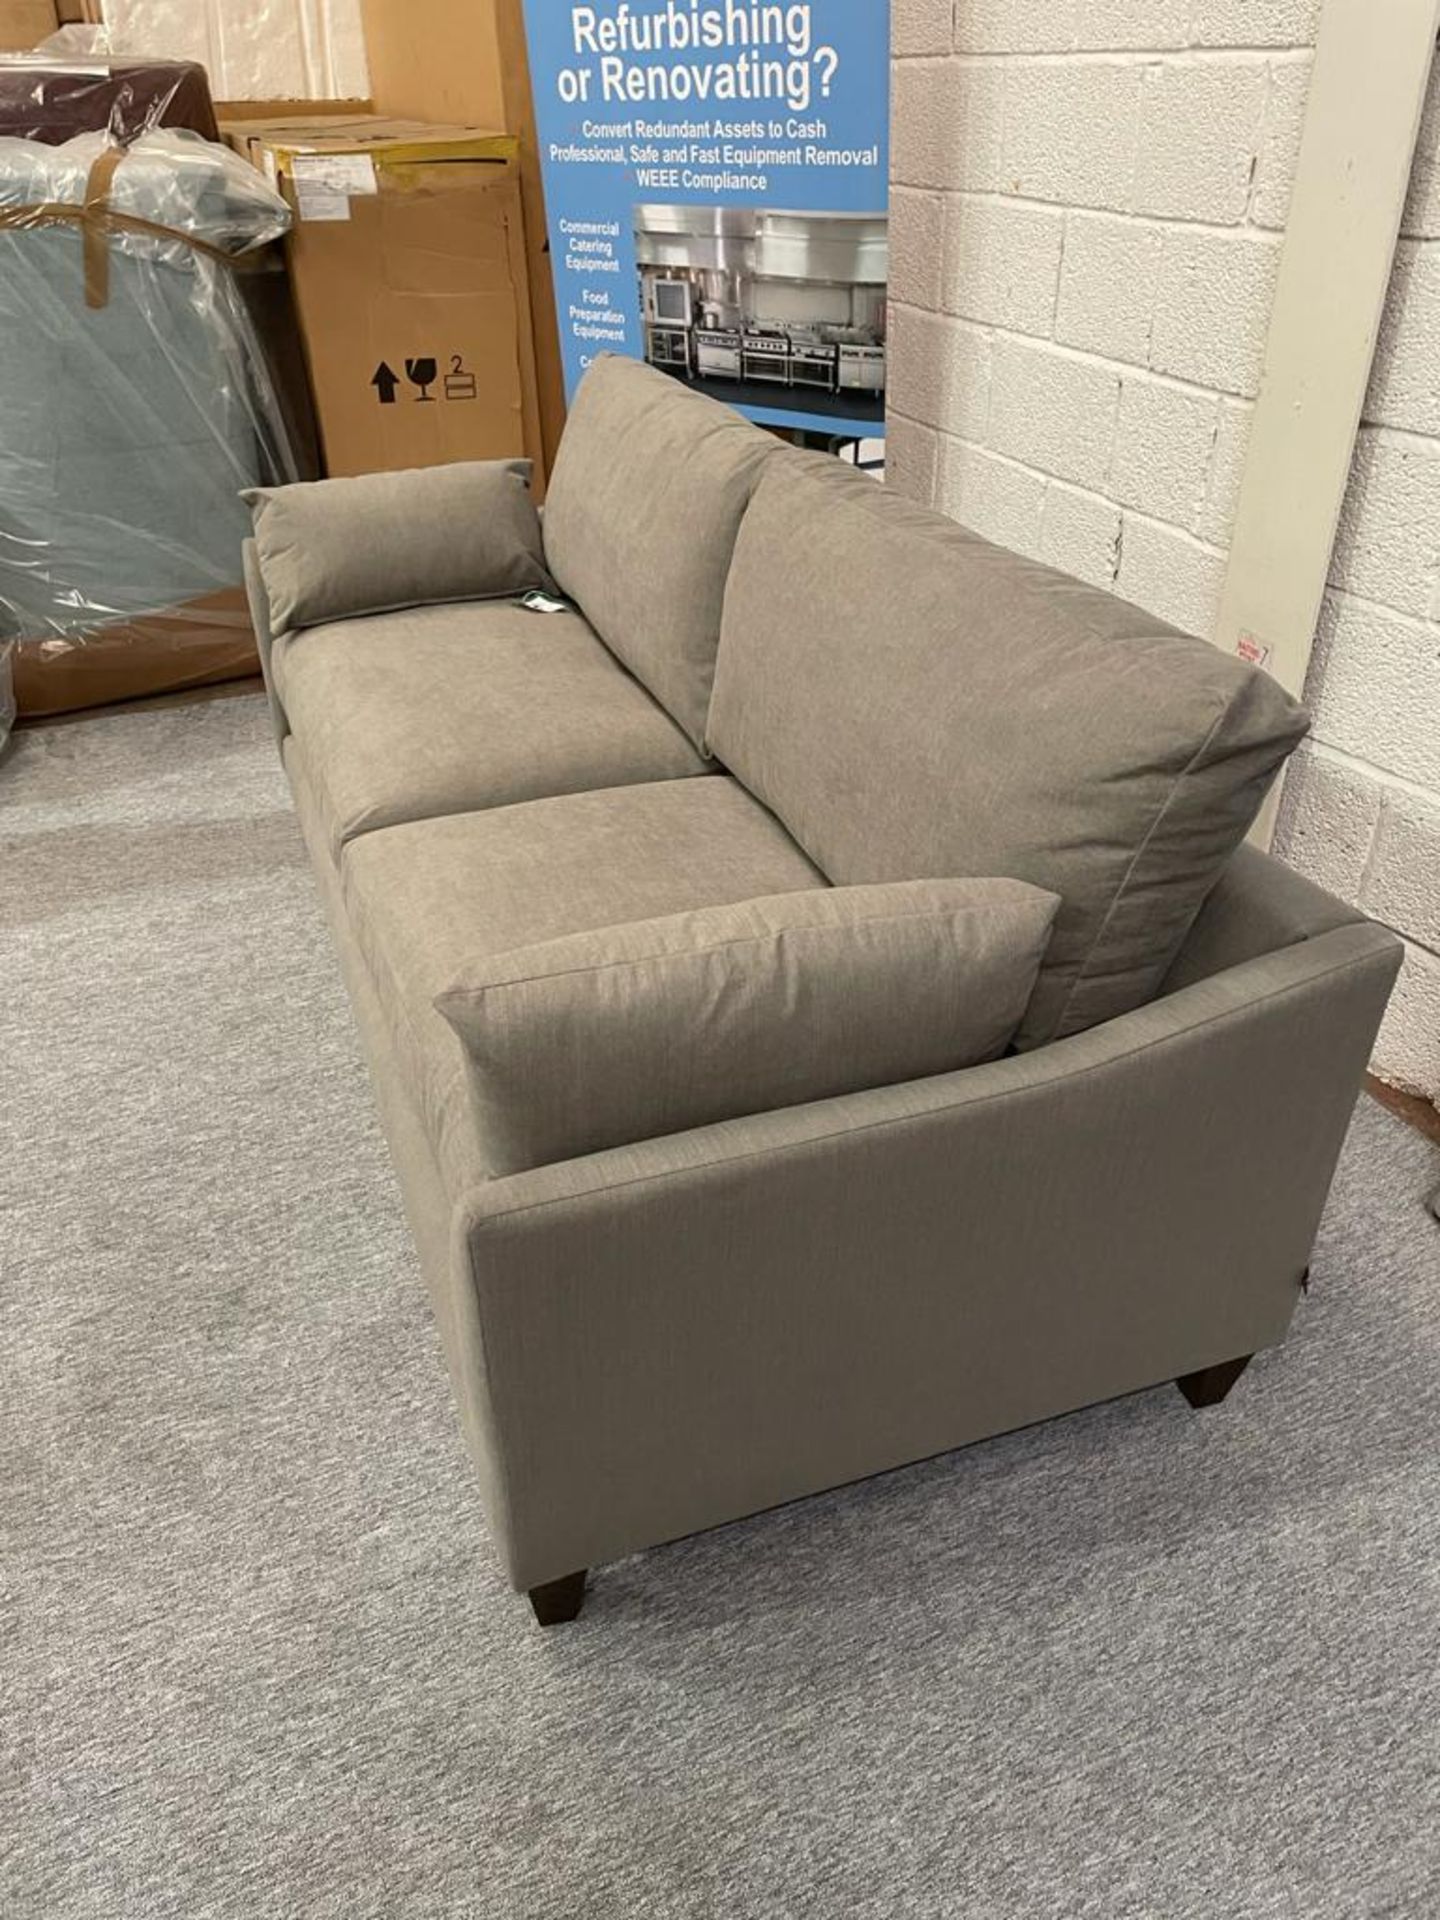 Kibre Sofa 3 Seater Upholstered in Fleck Grey Ultra modern sofa great for an apartment or open - Bild 2 aus 3